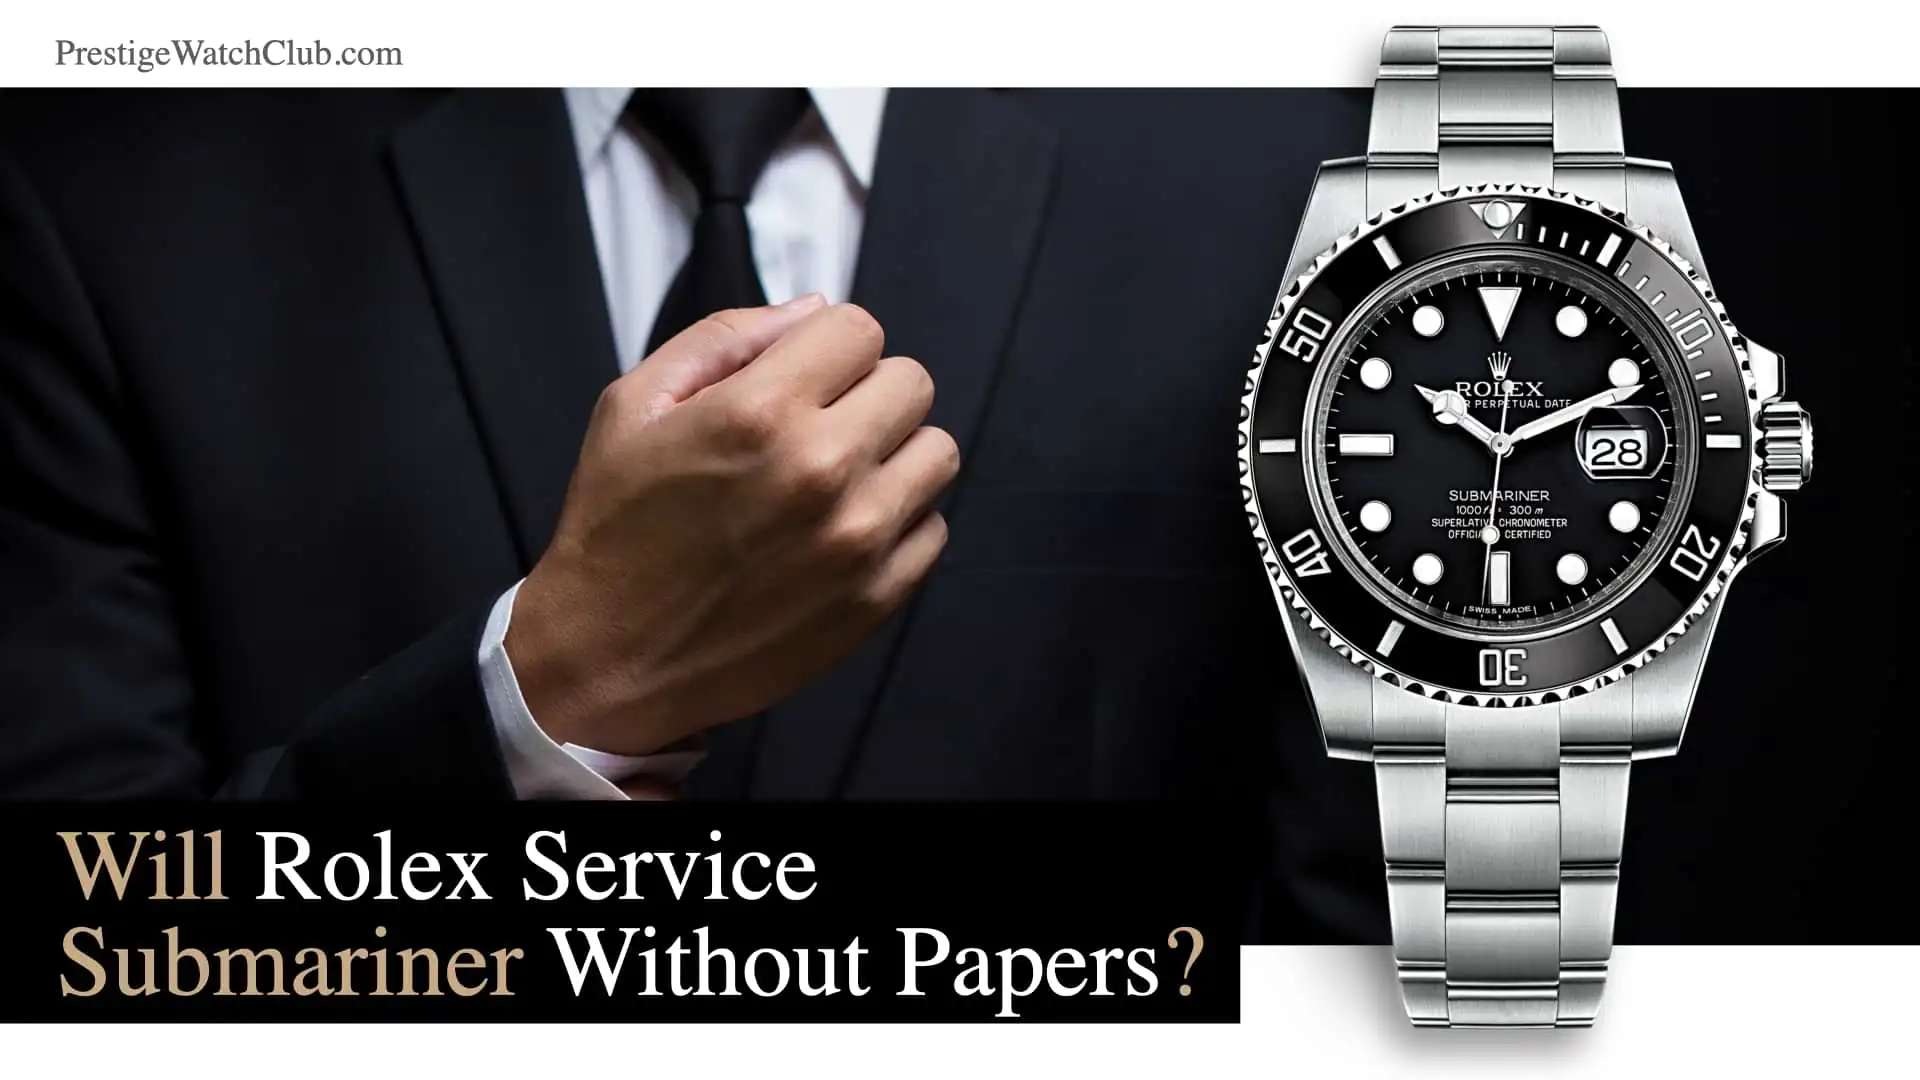 Will Rolex service a Submariner Watch Without Papers?